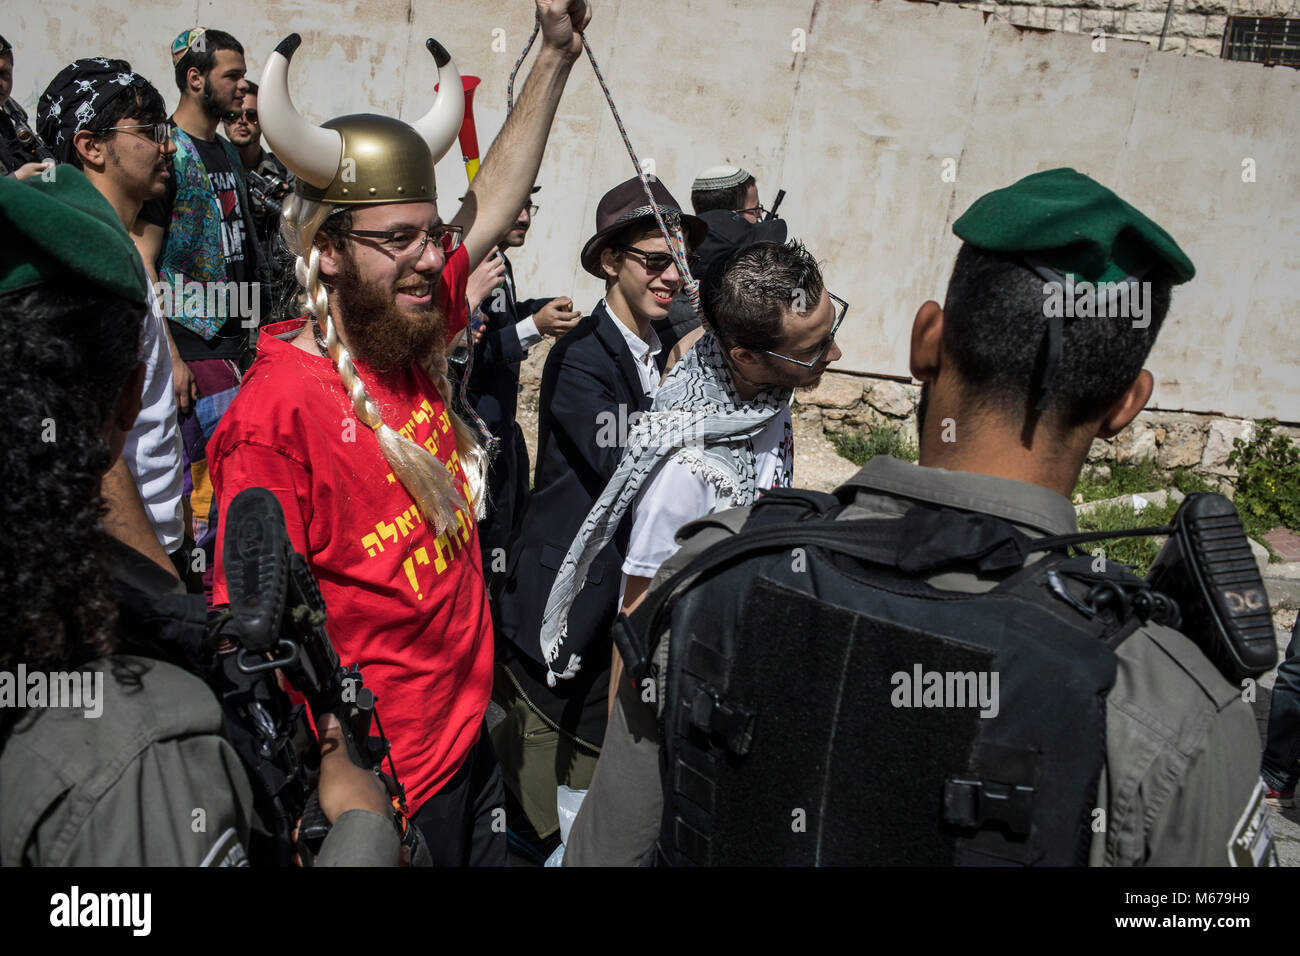 An Israeli settler wearing a Viking outfit pretends to hang a fellow settler wearing a Keffiyeh, a traditional Palestinian scarf, while taking part in a parade marking the Jewish holiday of Purim in the divided West Bank city of Hebron, 01 March 2018. The carnival-like Purim holiday is celebrated with parades and costume parties to commemorate the deliverance of the Jewish people from a plot to exterminate them in the ancient Persian empire 2,500 years ago, as recorded in the Biblical Book of Esther. Photo: Ilia Yefimovich/dpa Stock Photo